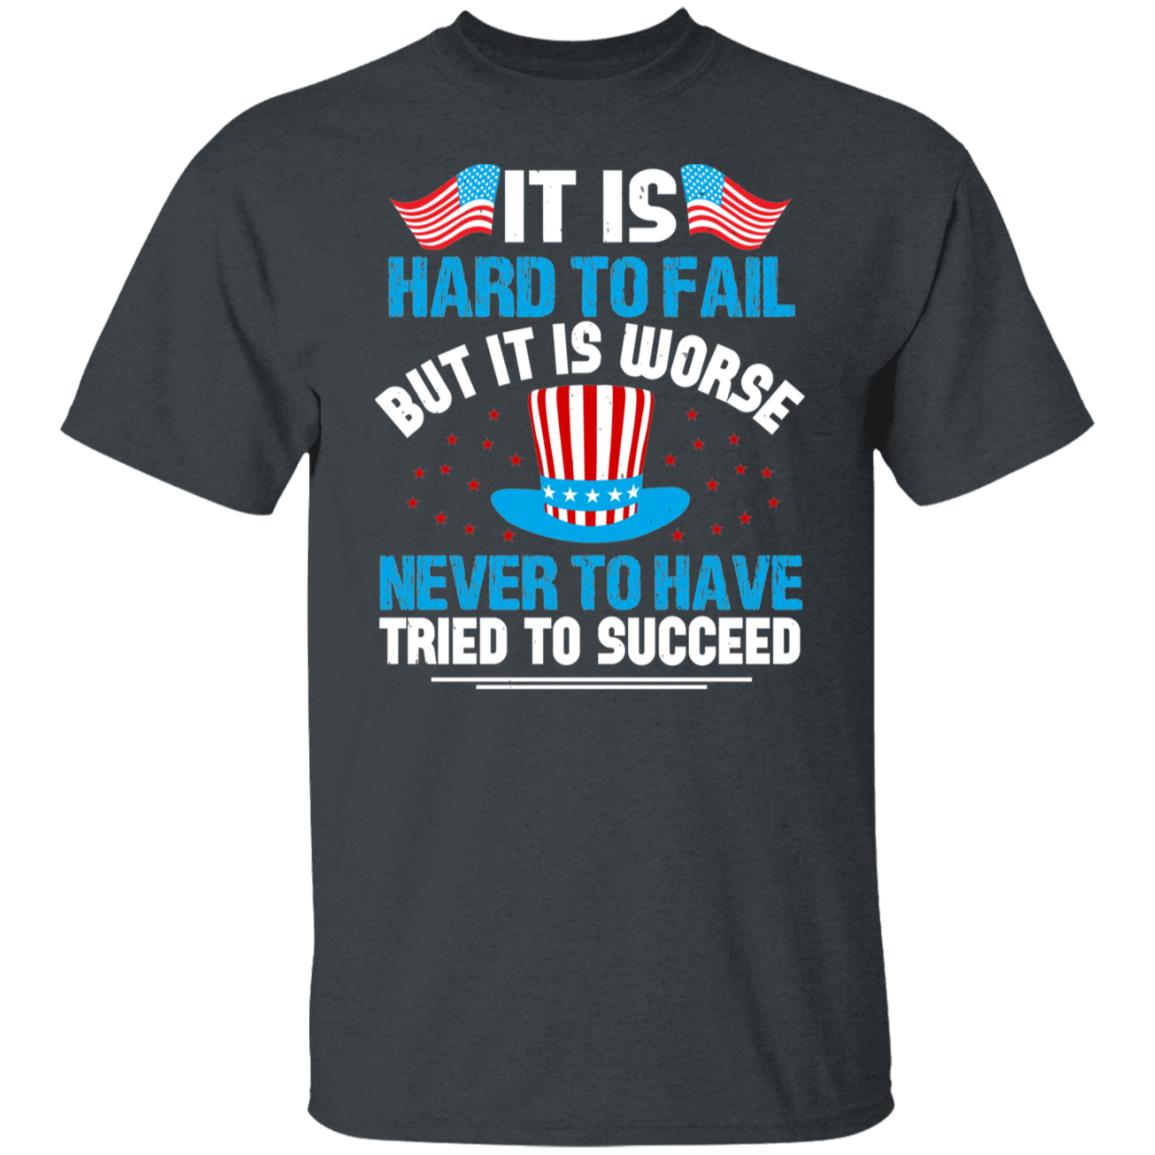 It is hard to fail but it is worse never to have tried to succeed 4th of July Shirt